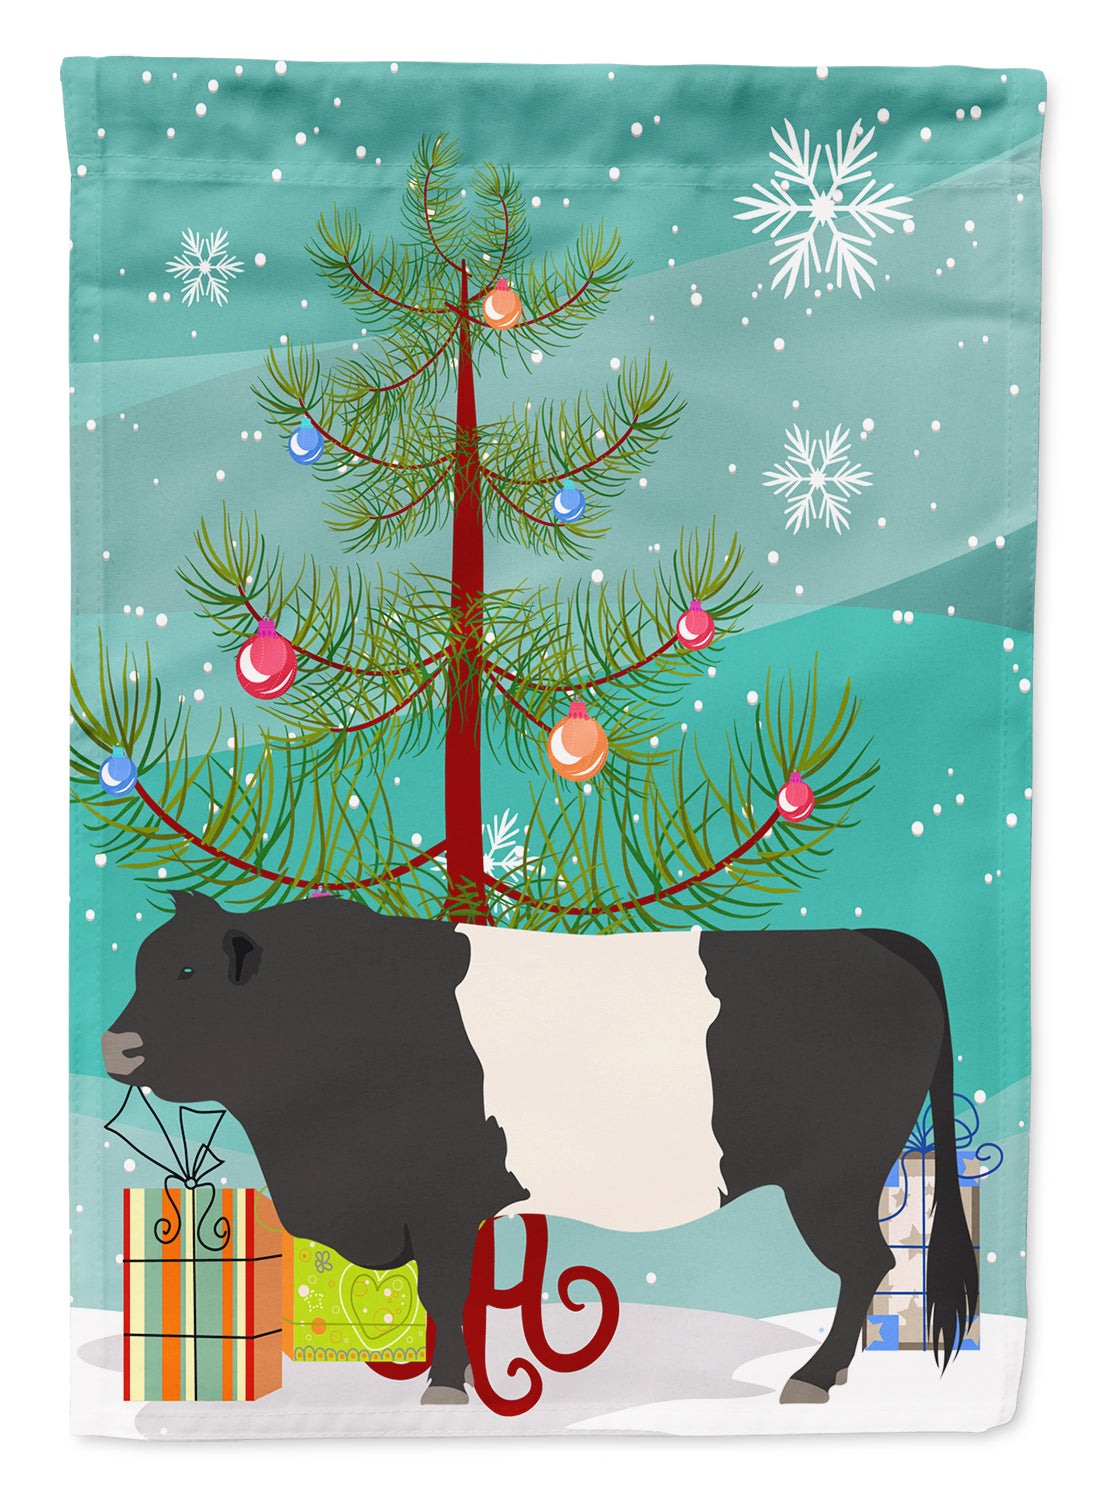 Belted Galloway Cow Christmas Flag Garden Size BB9198GF  the-store.com.